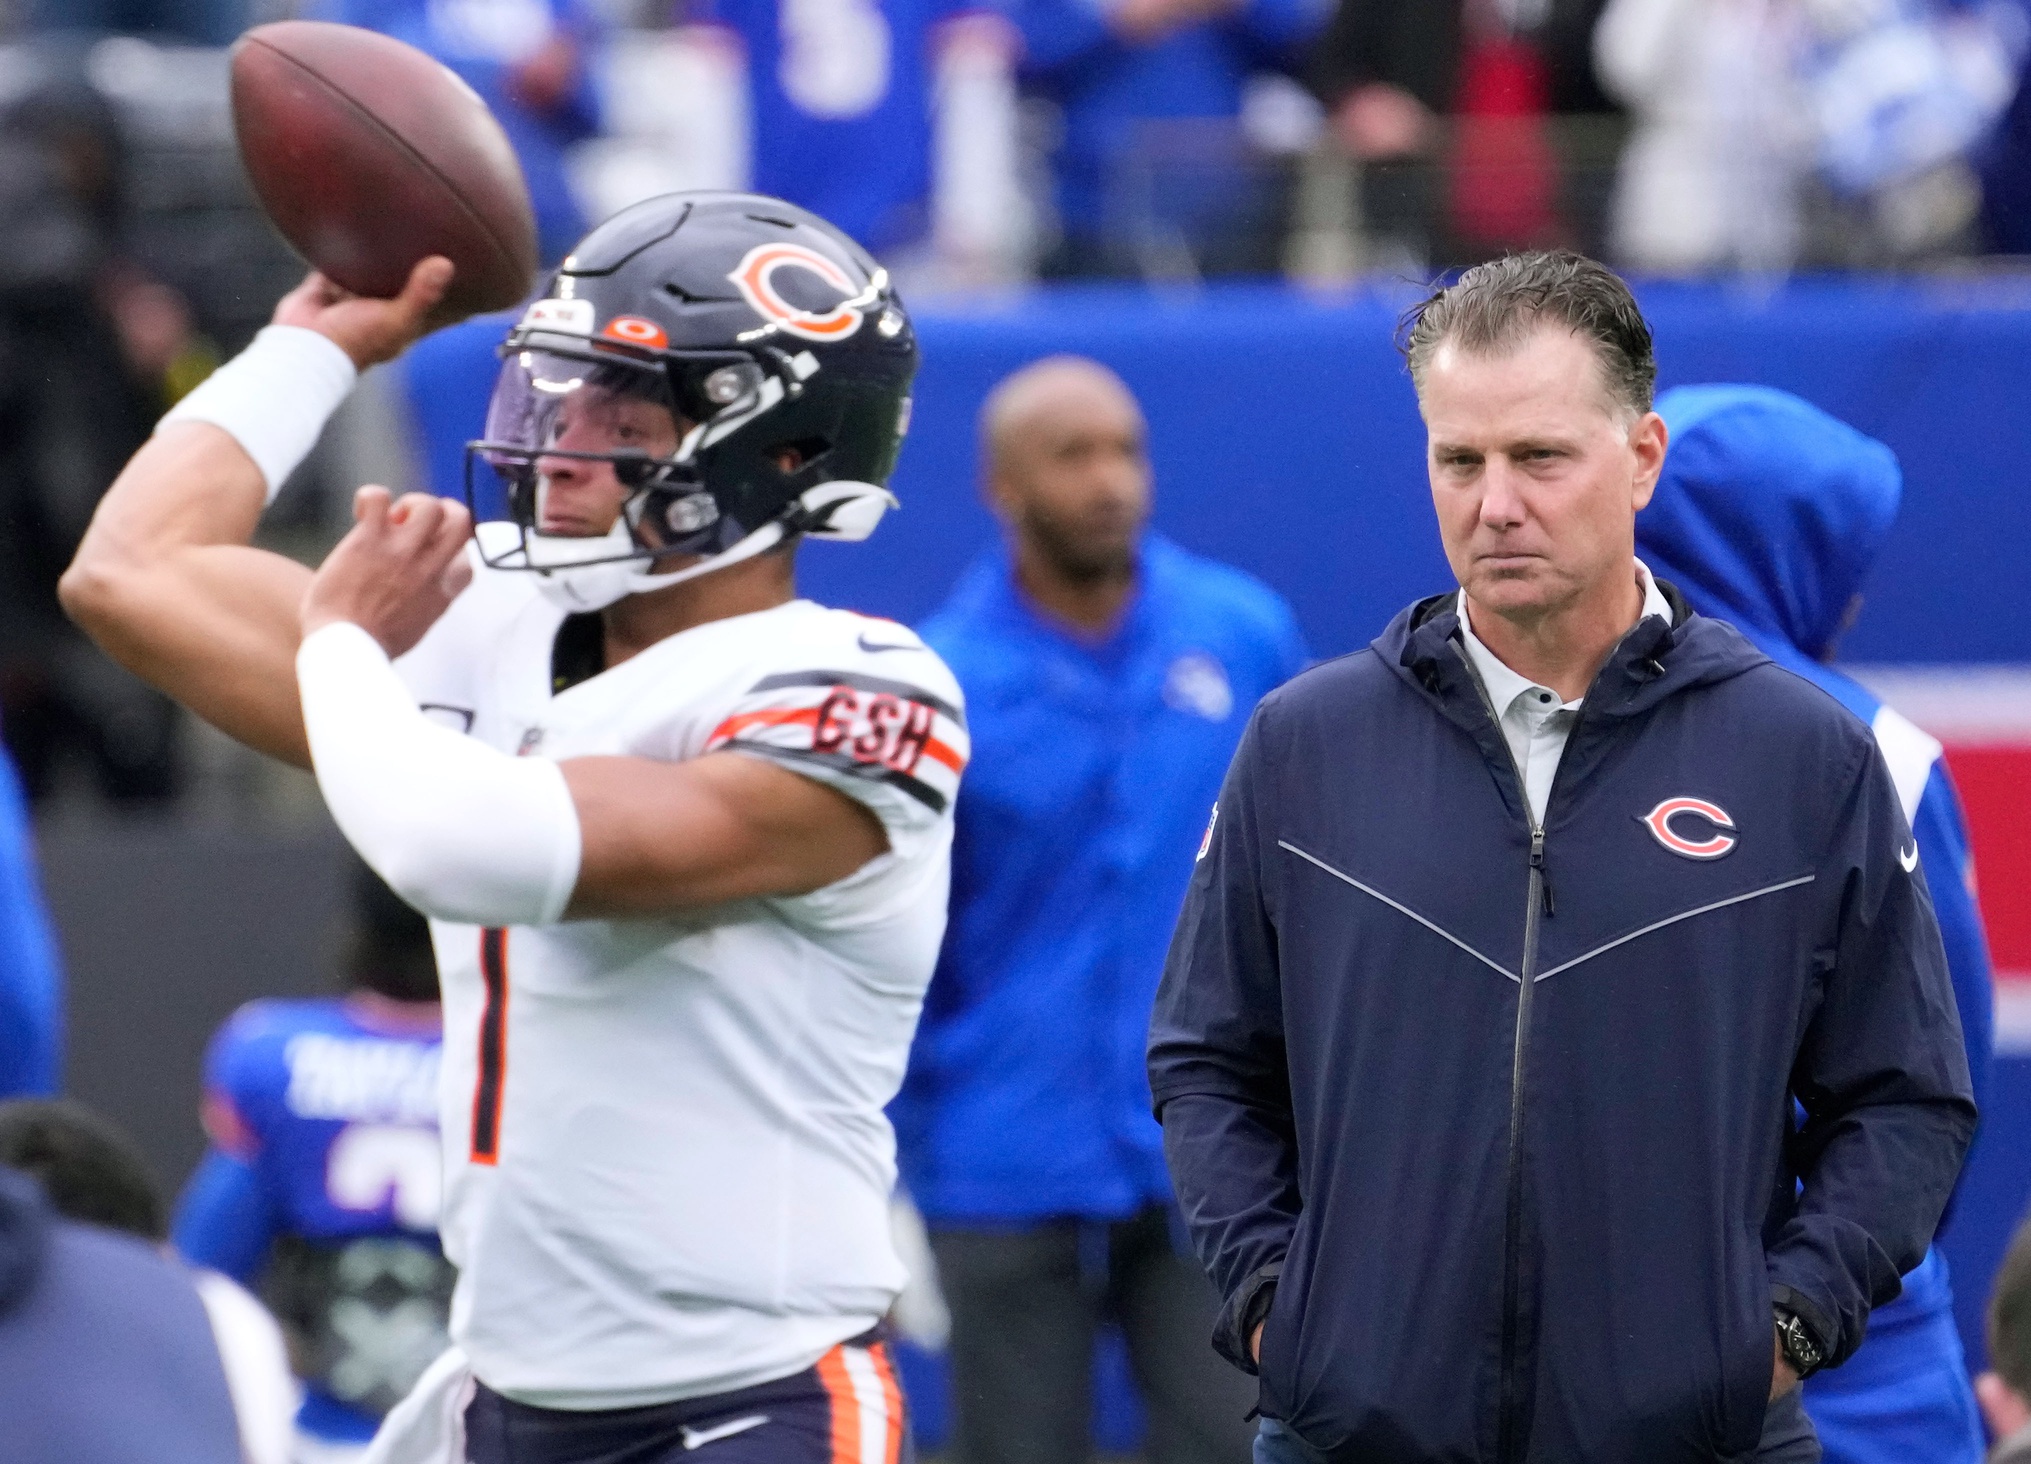 Oct 2, 2022; East Rutherford, New Jersey, USA; Chicago Bears head coach Matt Eberflus watches quarterback Justin Fields (1) warm up before the game against the New York Giants at MetLife Stadium. Mandatory Credit: Robert Deutsch-USA TODAY Sports